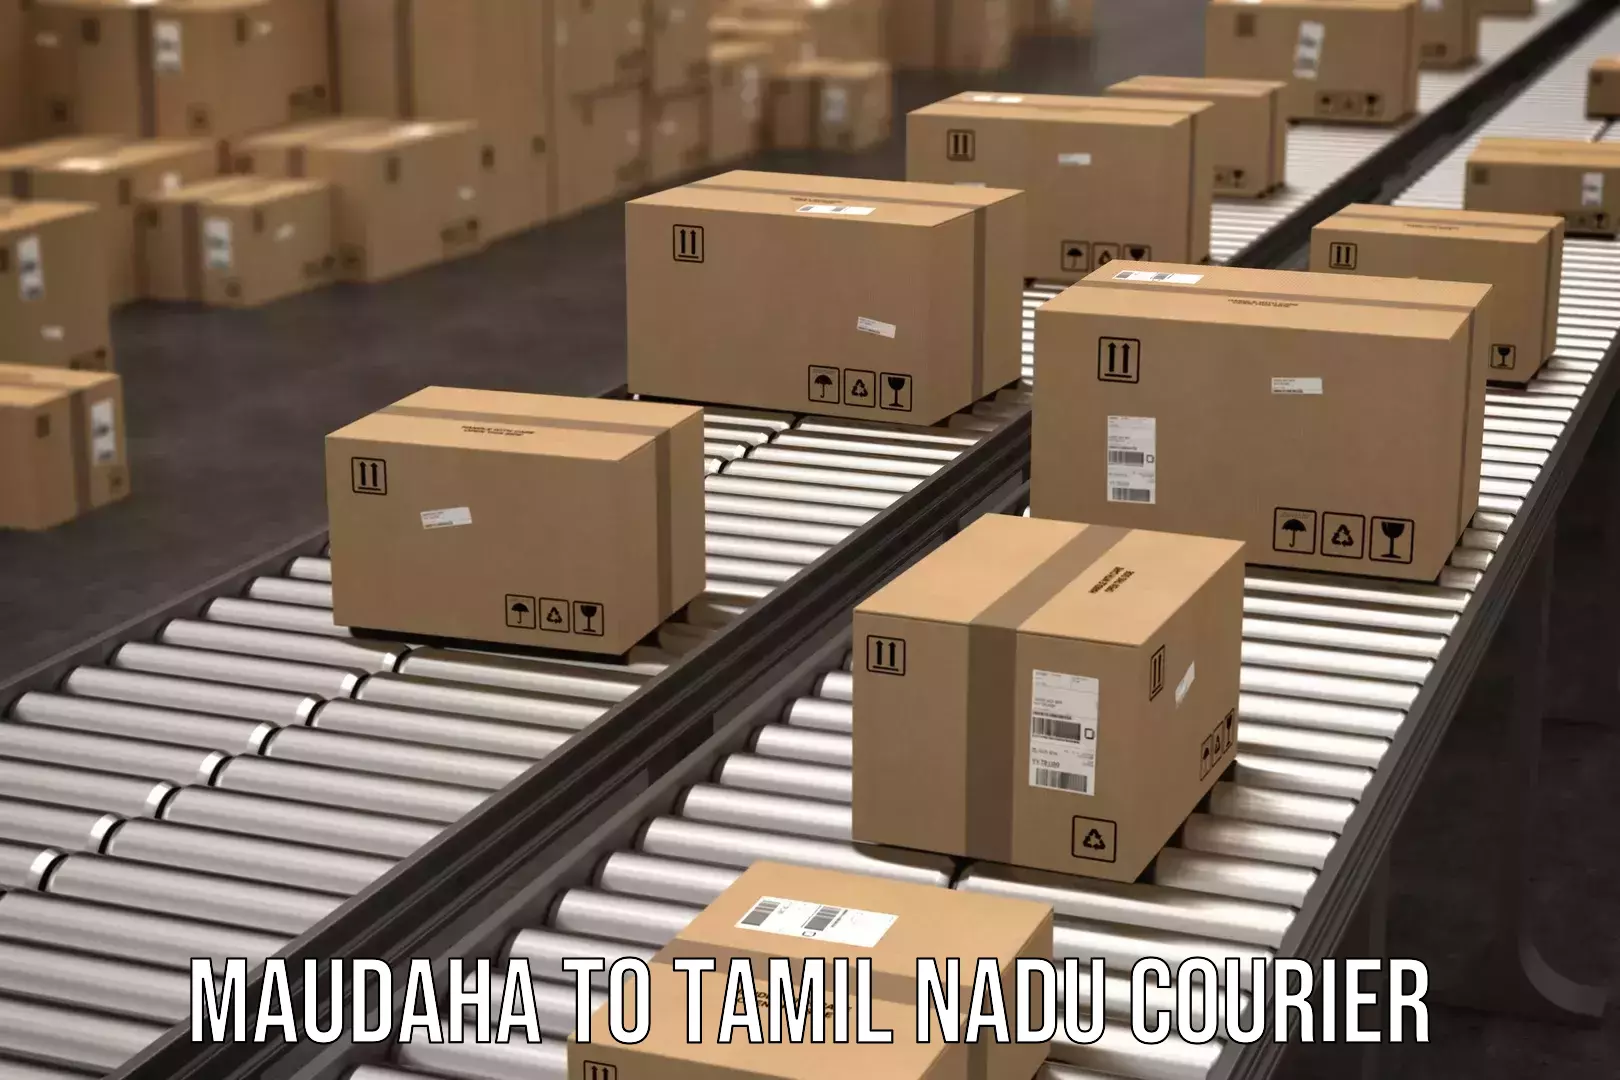 24/7 courier service Maudaha to Thisayanvilai